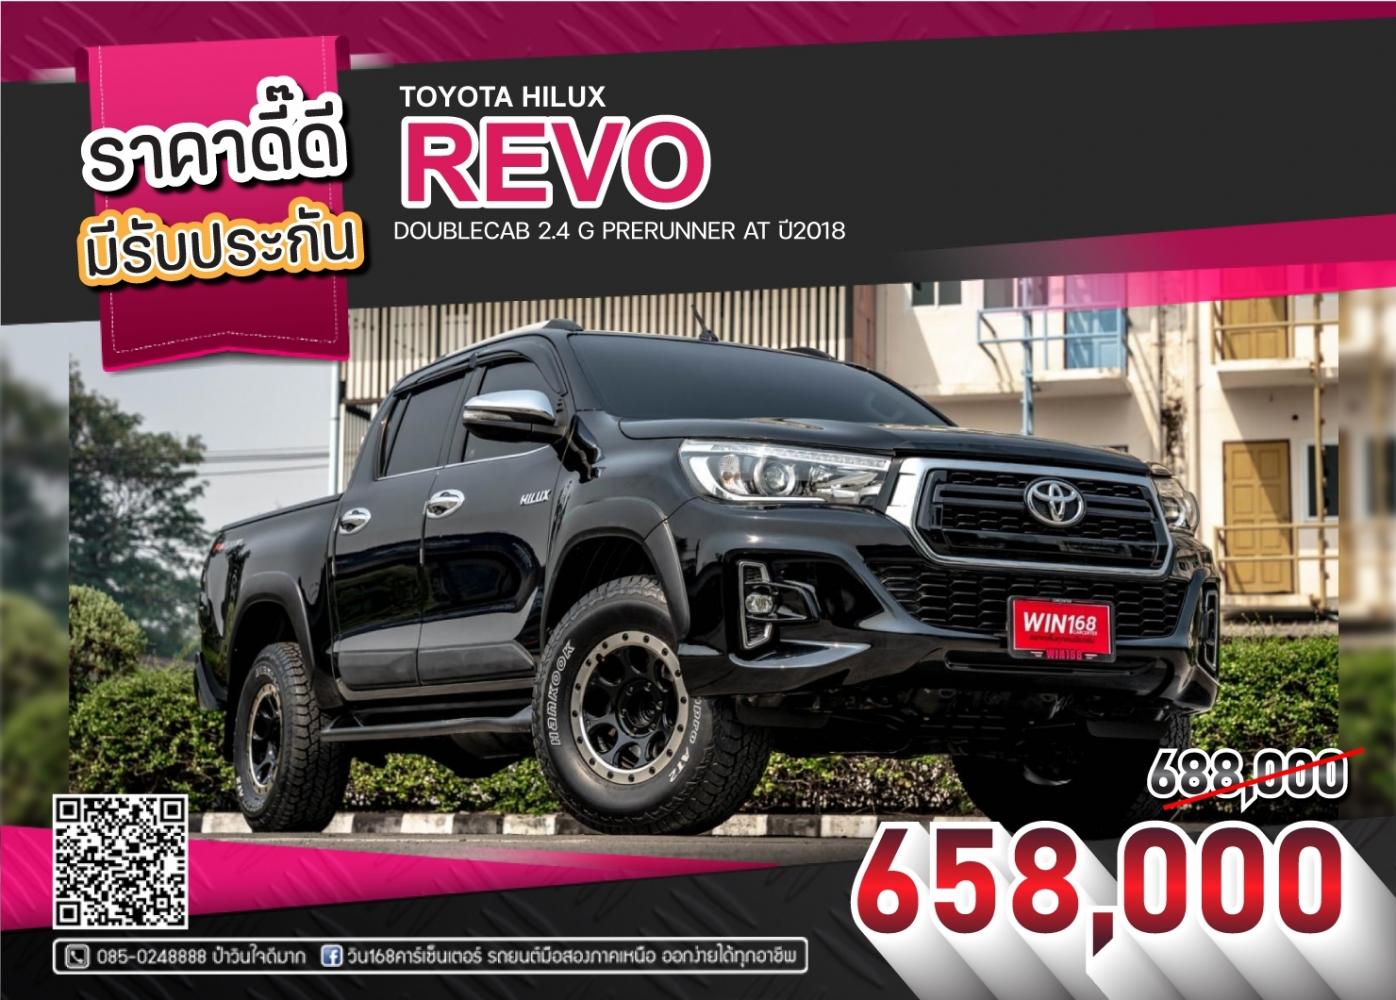 TOYOTA HILUX REVO DOUBLECAB 2.4 G PRERUNNER AT ปี2018 (T240)